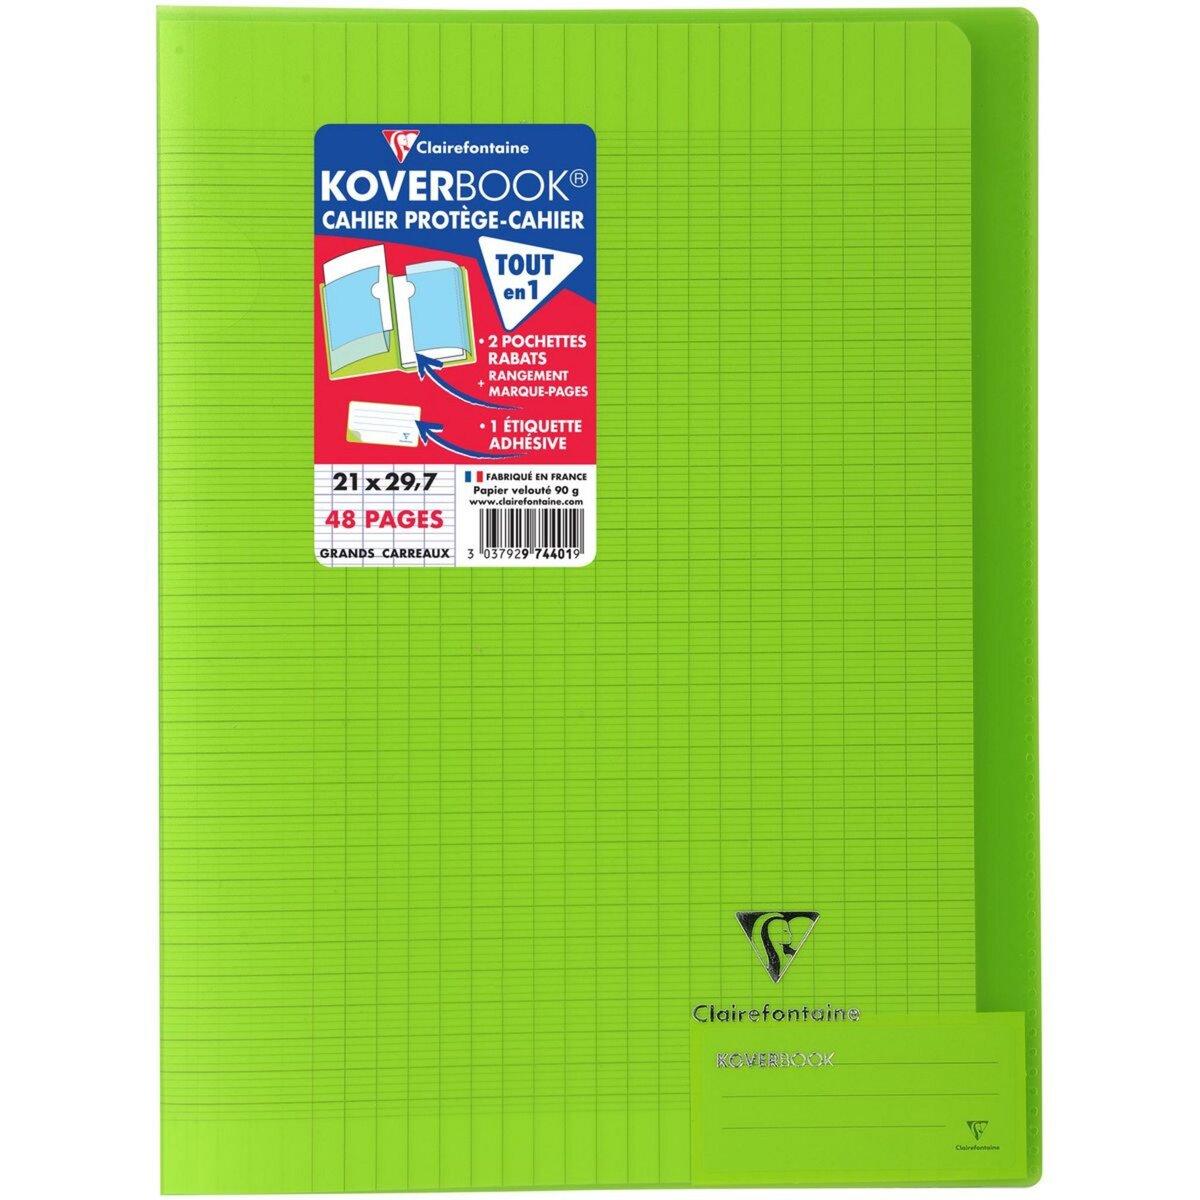 CLAIREFONTAINE Cahier polypro Koverbook 21x29,7cm 48 pages grands carreaux Seyes translucide vert